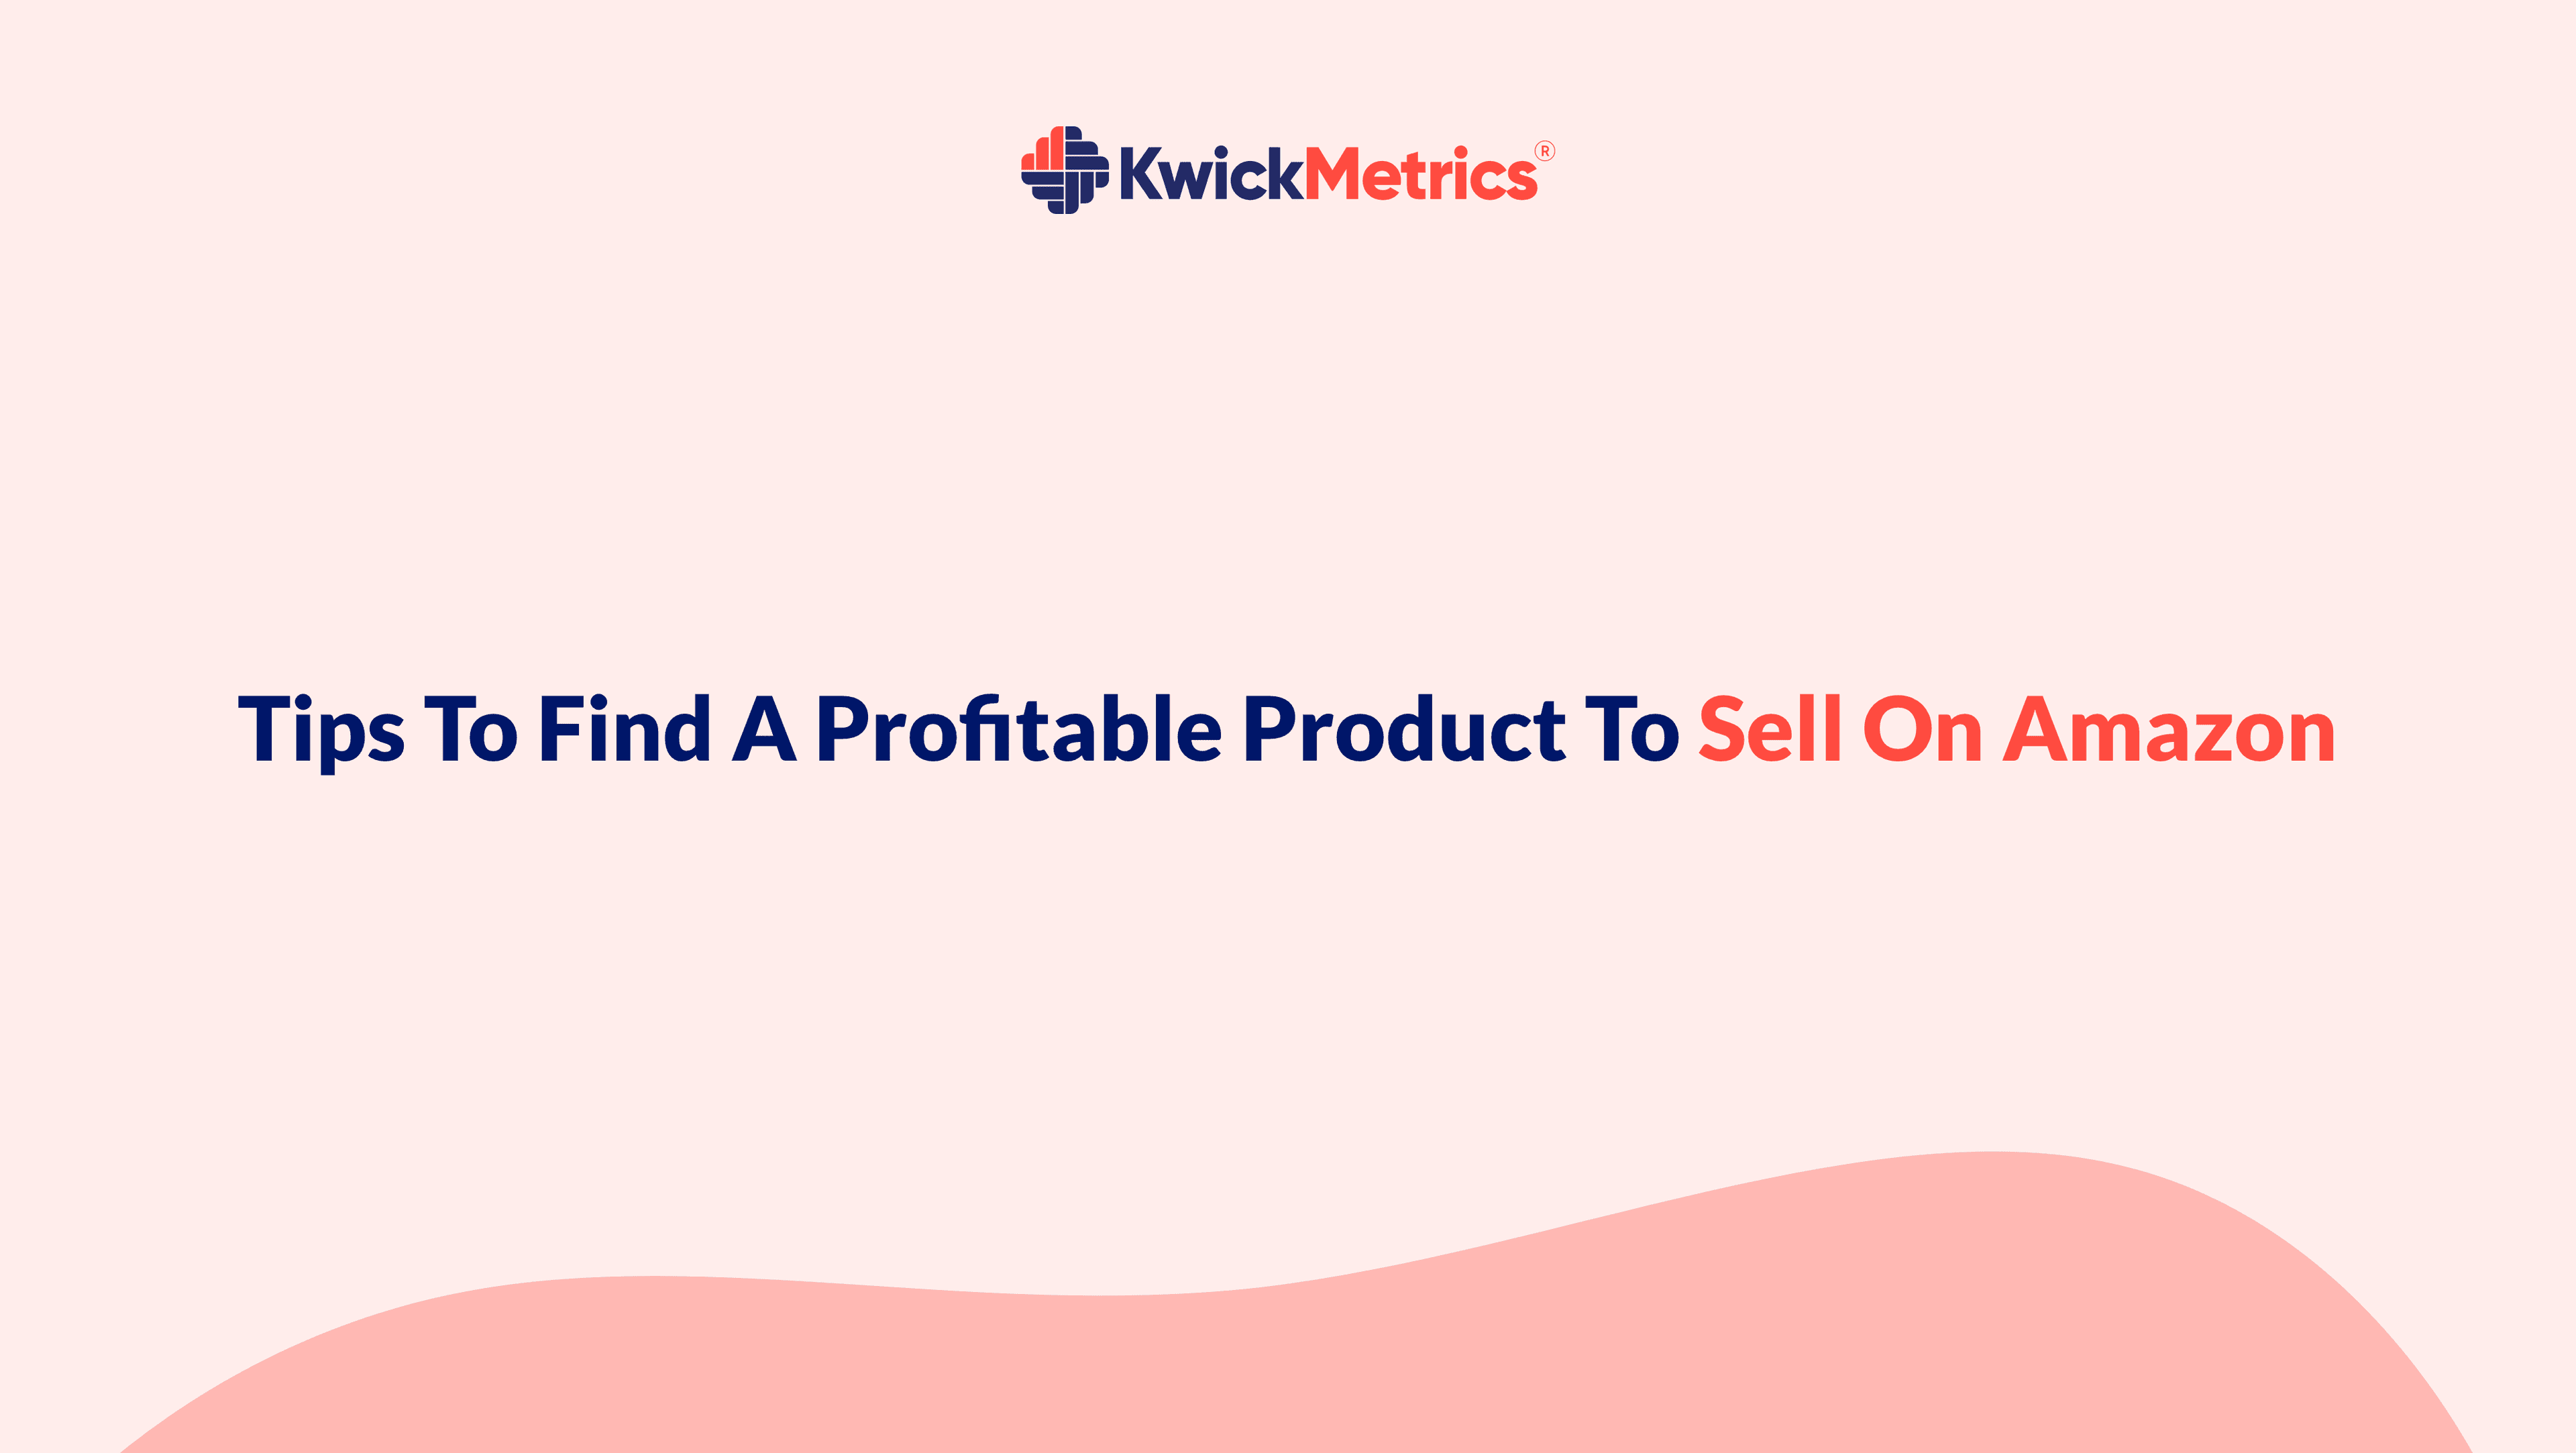 Tips To Find A Profitable Product To Sell On Amazon